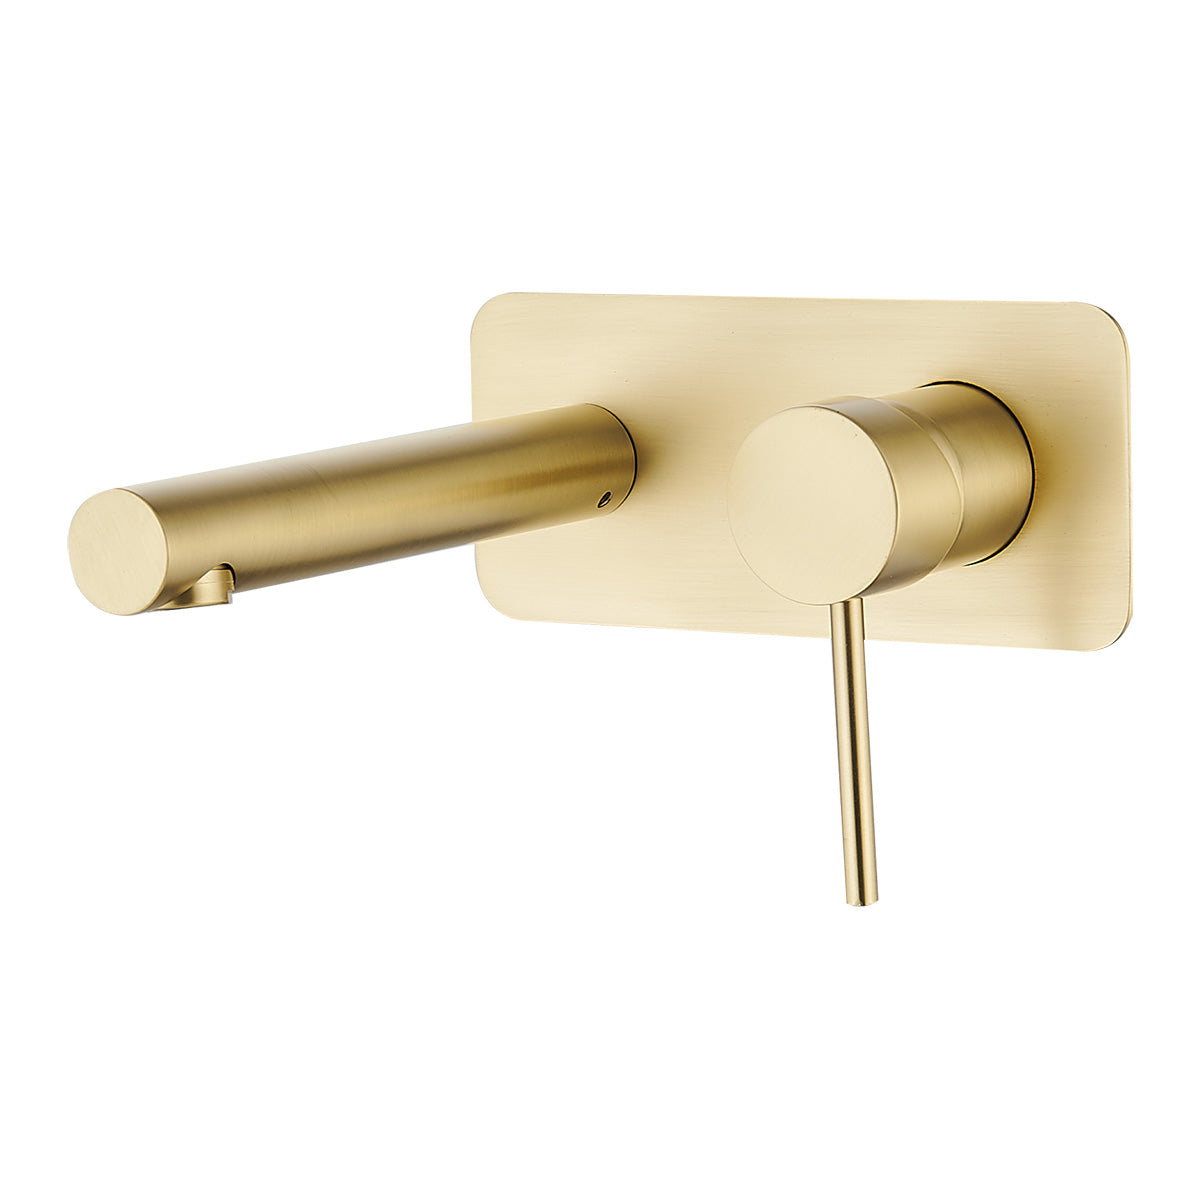 IDWS1 (BG) / Ideal Wall Mixer With Outlet (Brushed Gold) - Hellycar Brushed Gold Wall Mounted Basin Mixer - Bath Mixer